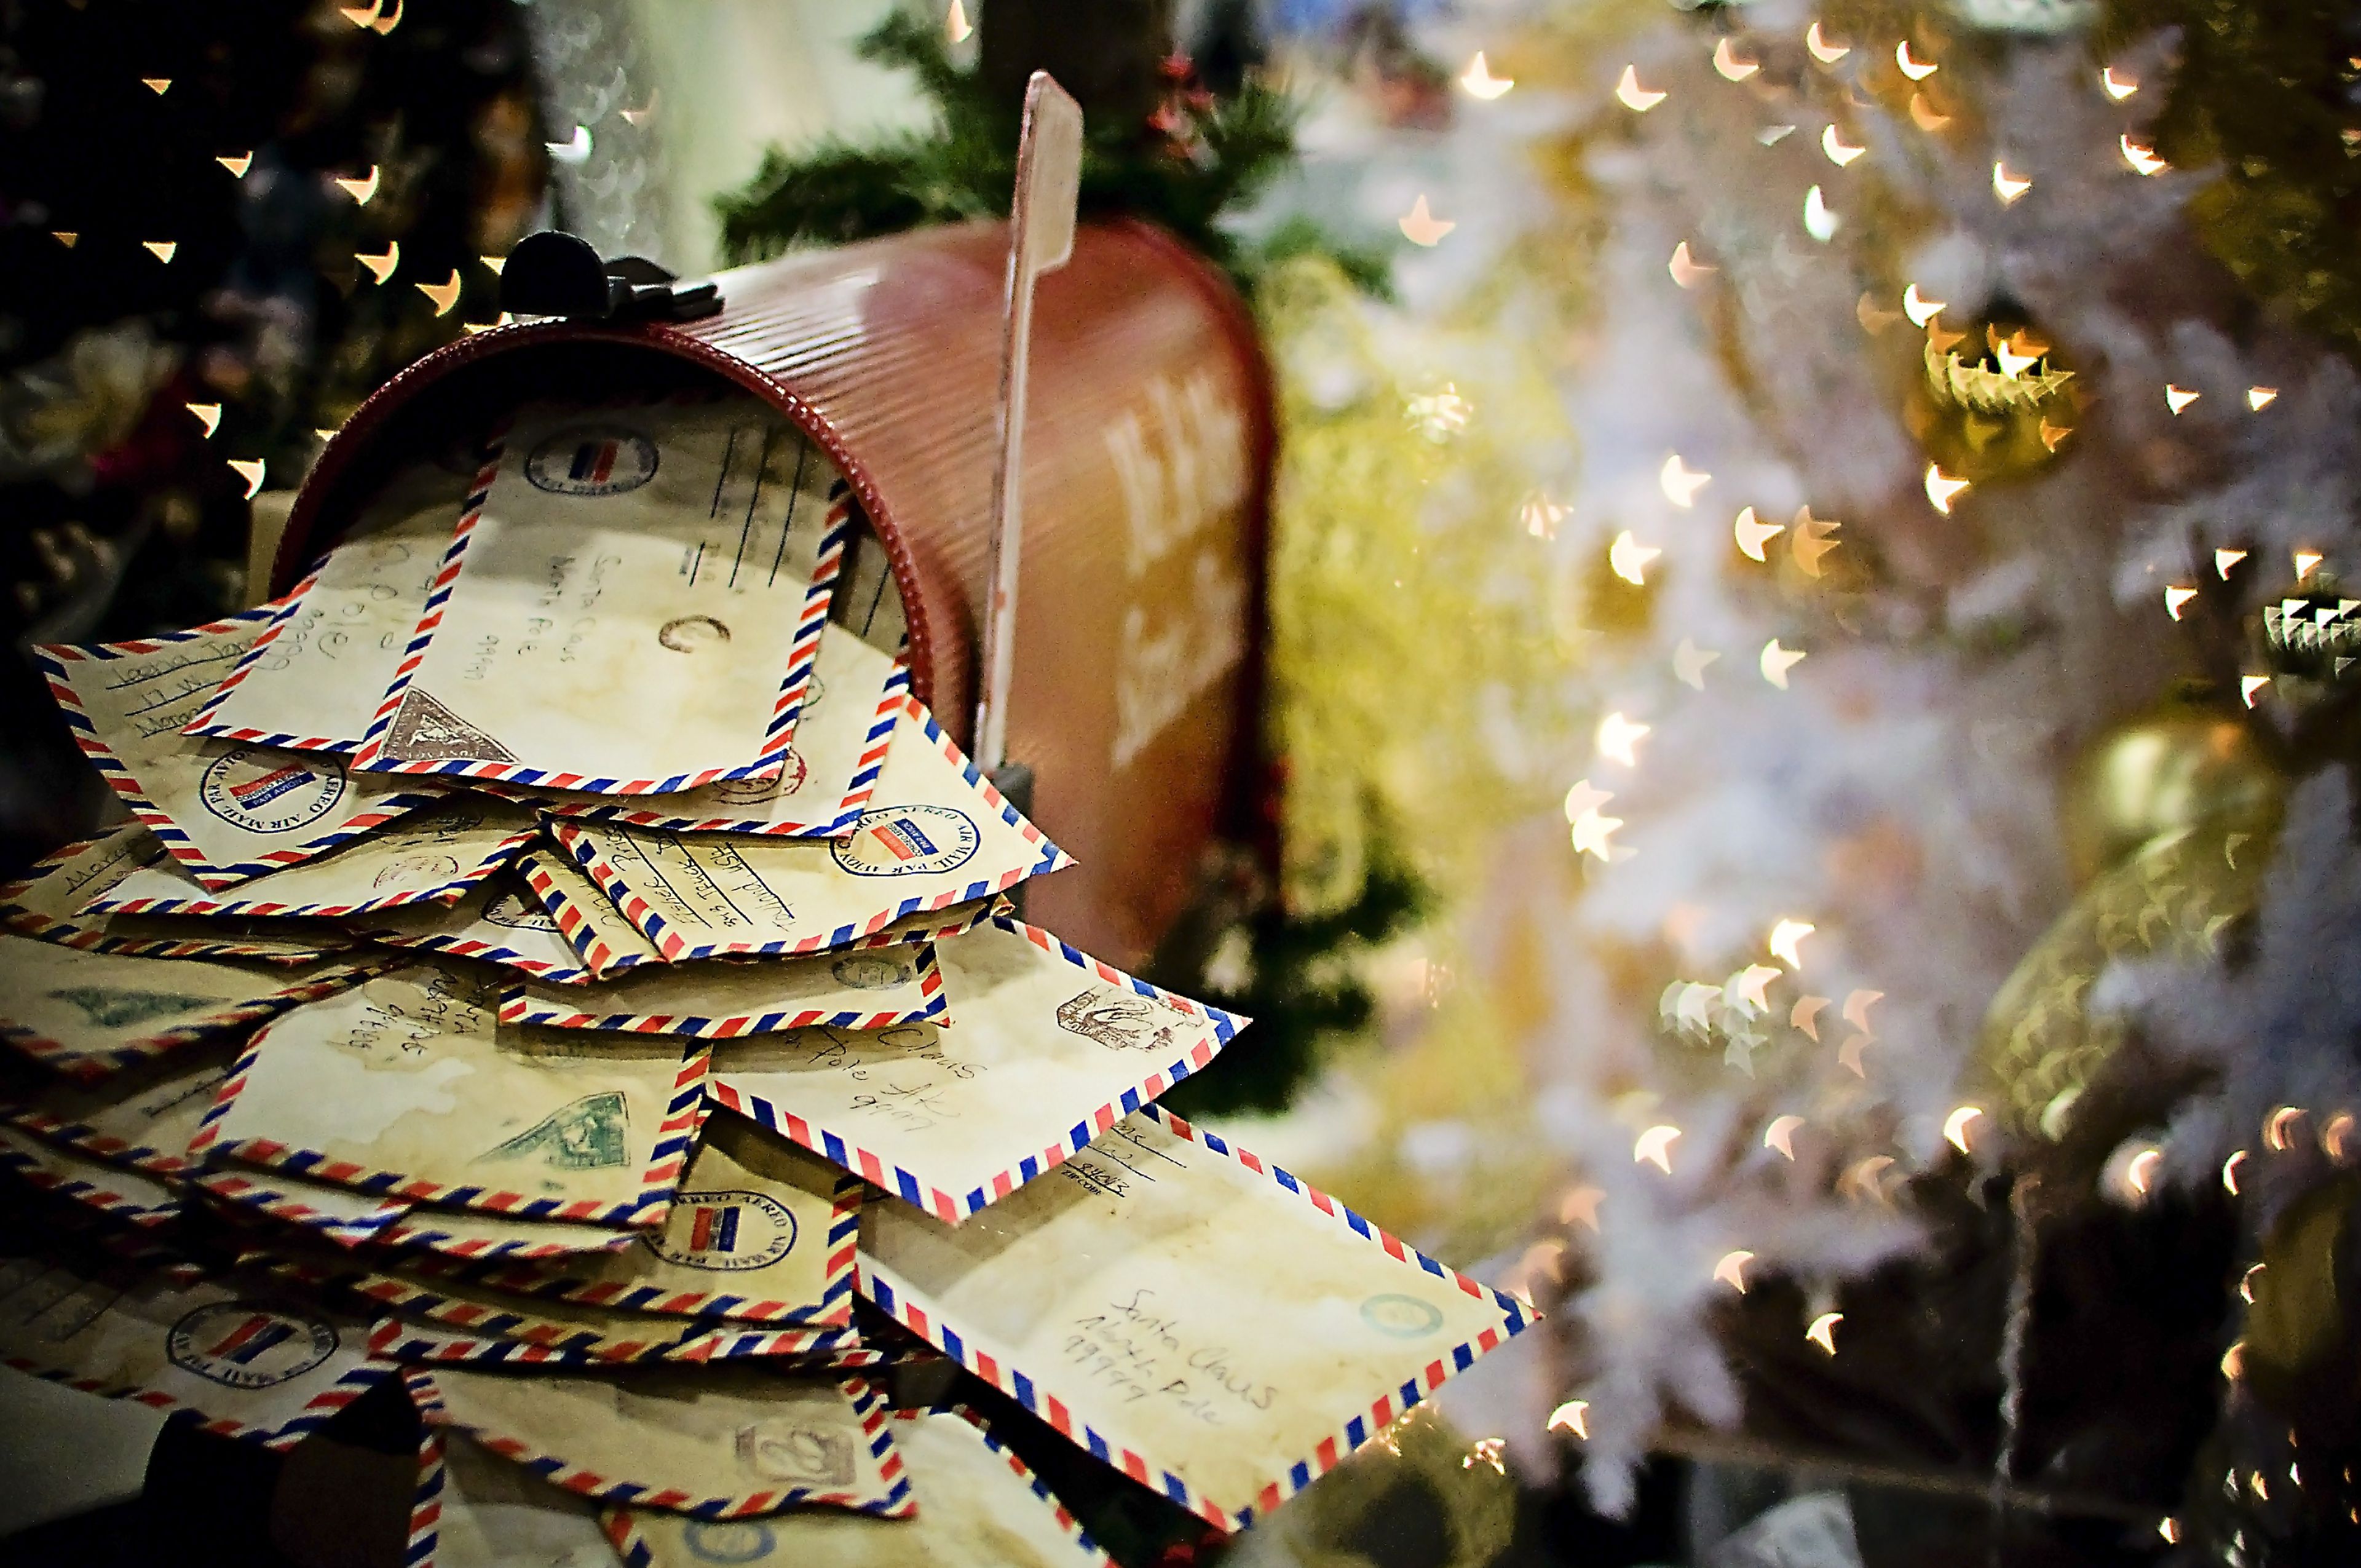 An image of letters in a mailbox during Christmastime.